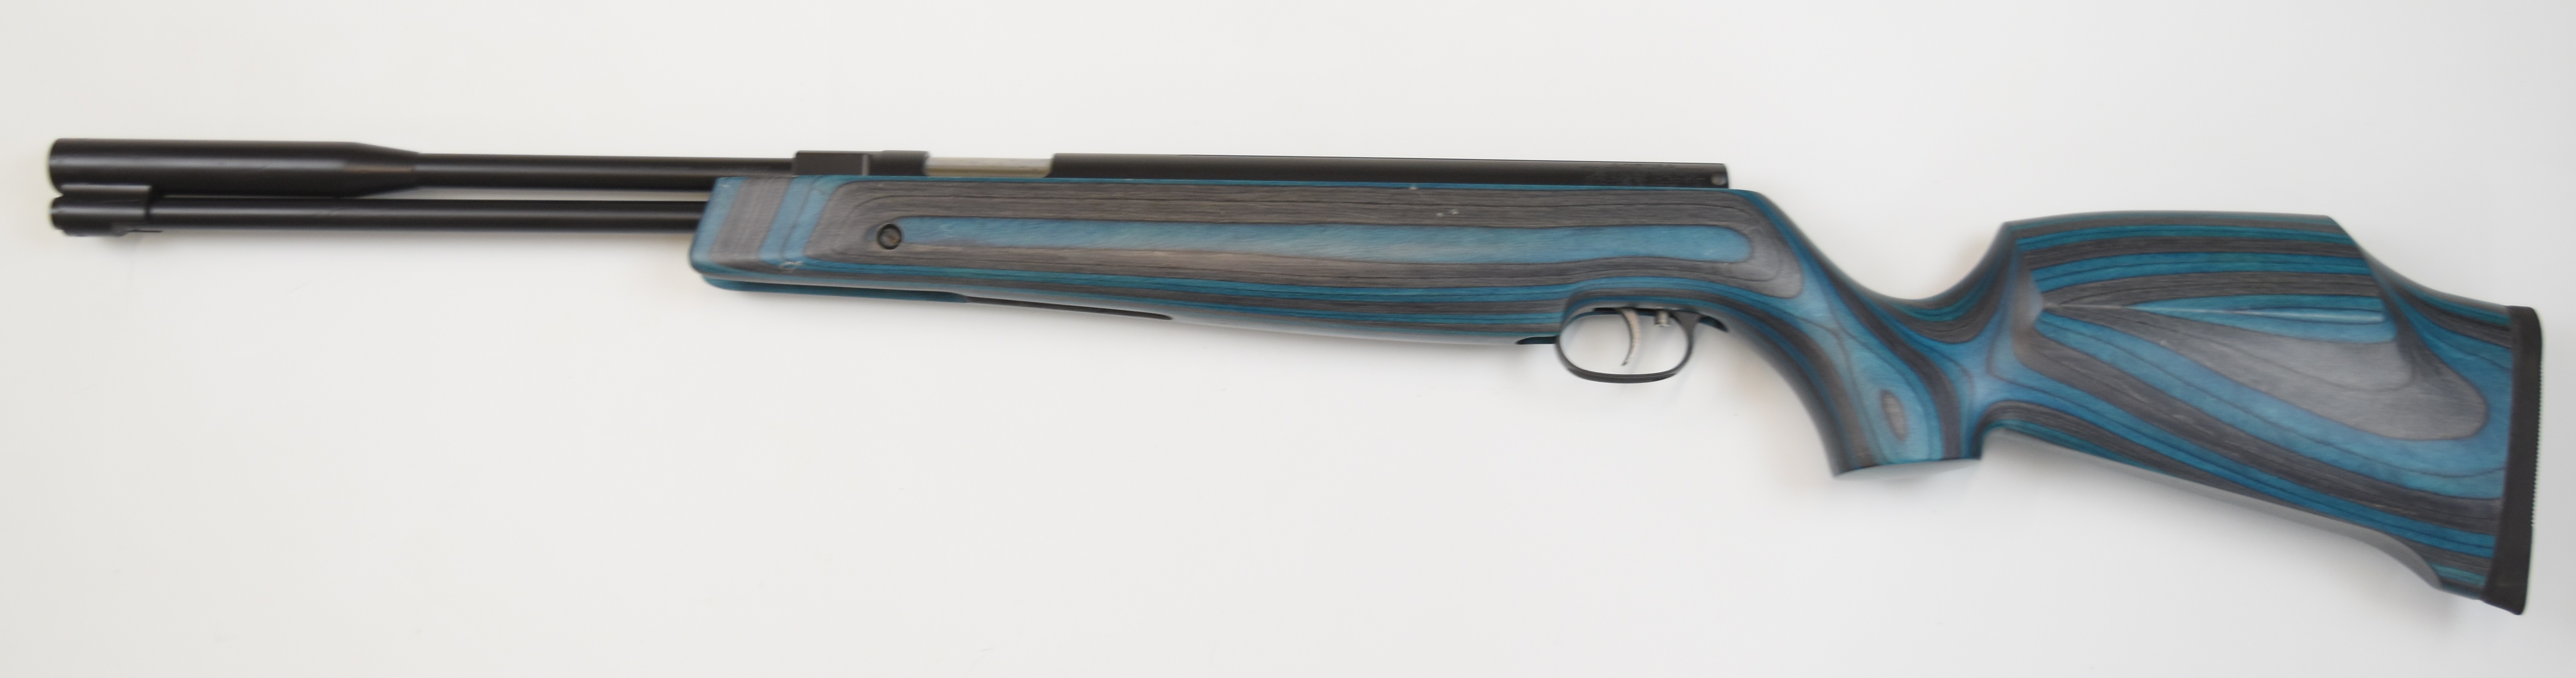 Weihrauch HW97K .177 underlever air rifle with blue laminated show wood stock, semi-pistol grip, - Image 8 of 9